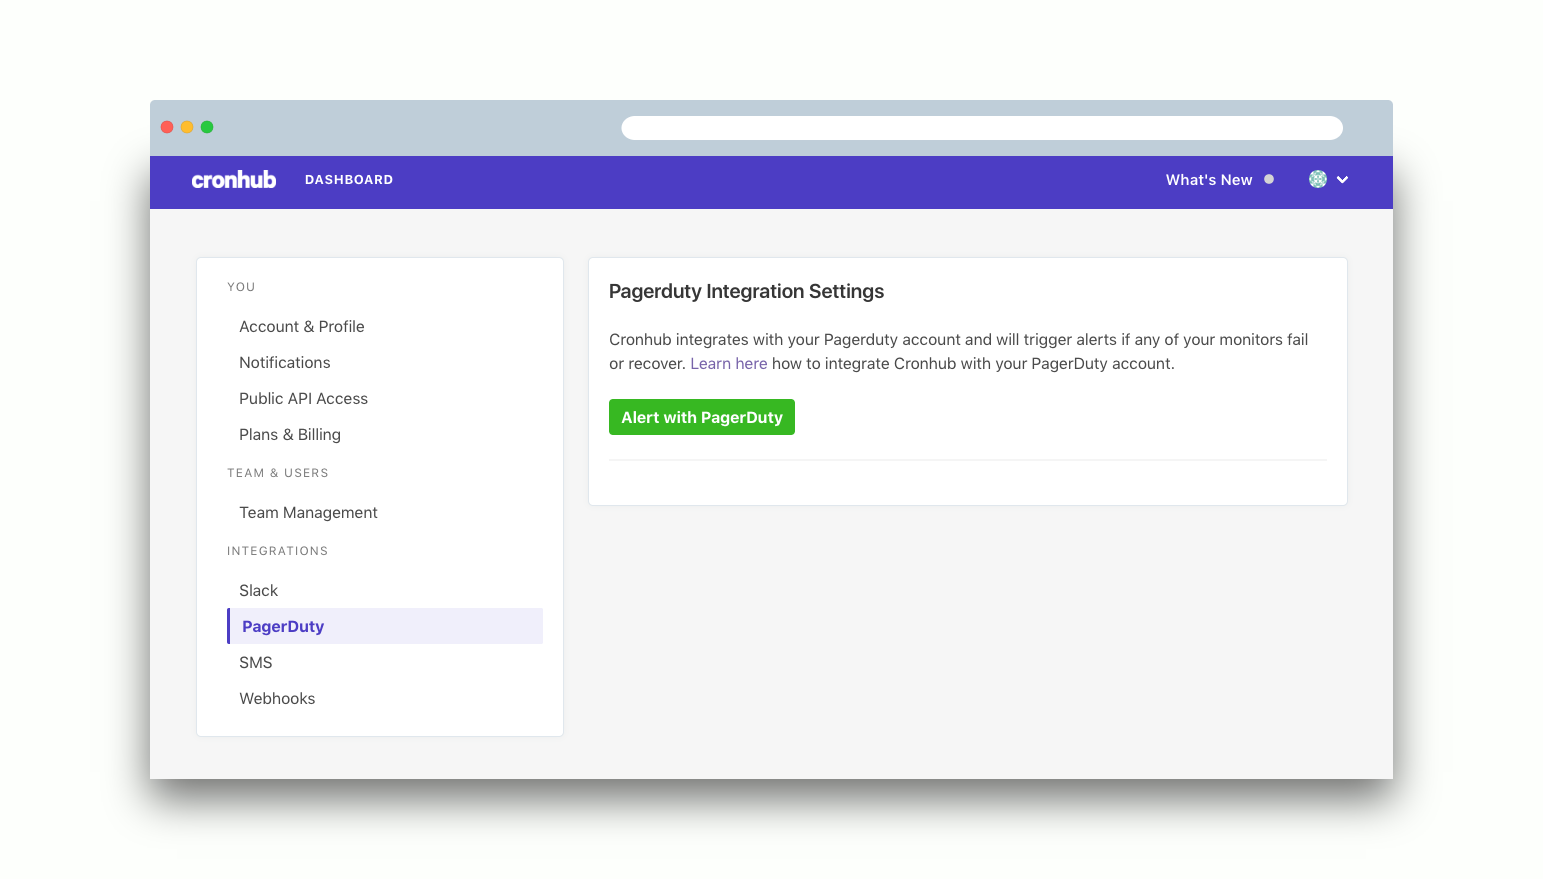 Alert with PagerDuty